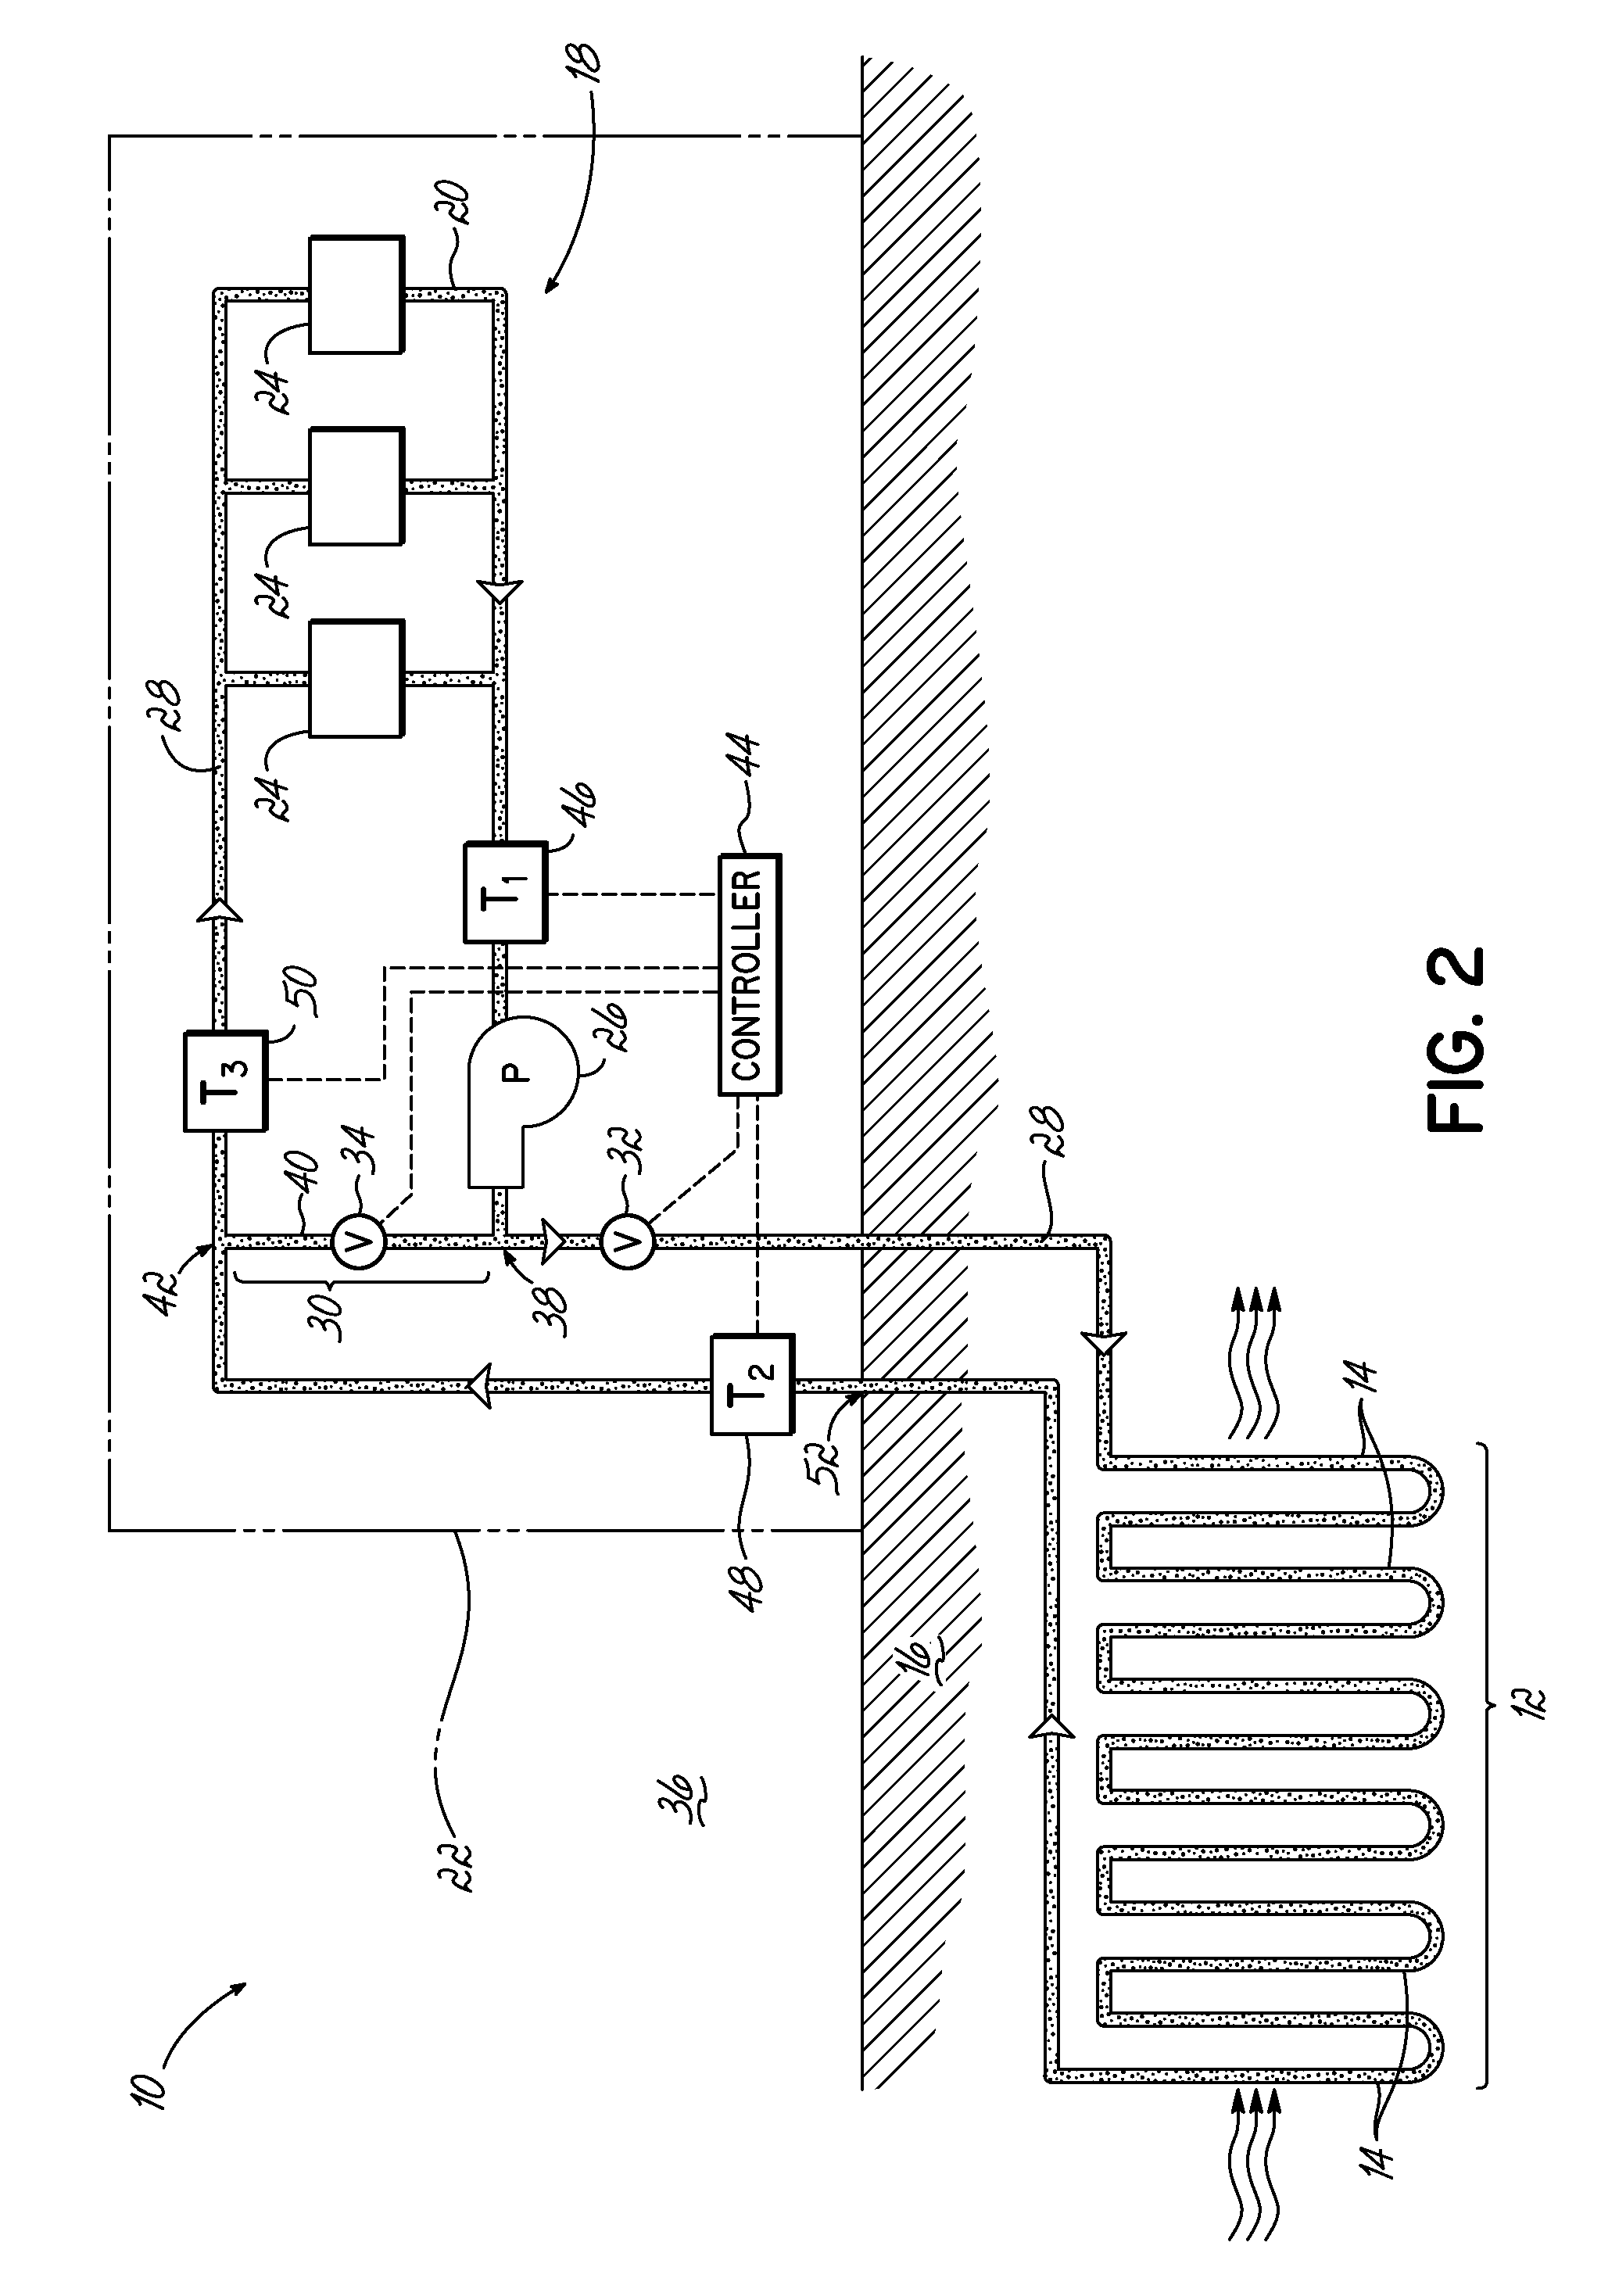 Ground loop bypass for ground source heating or cooling